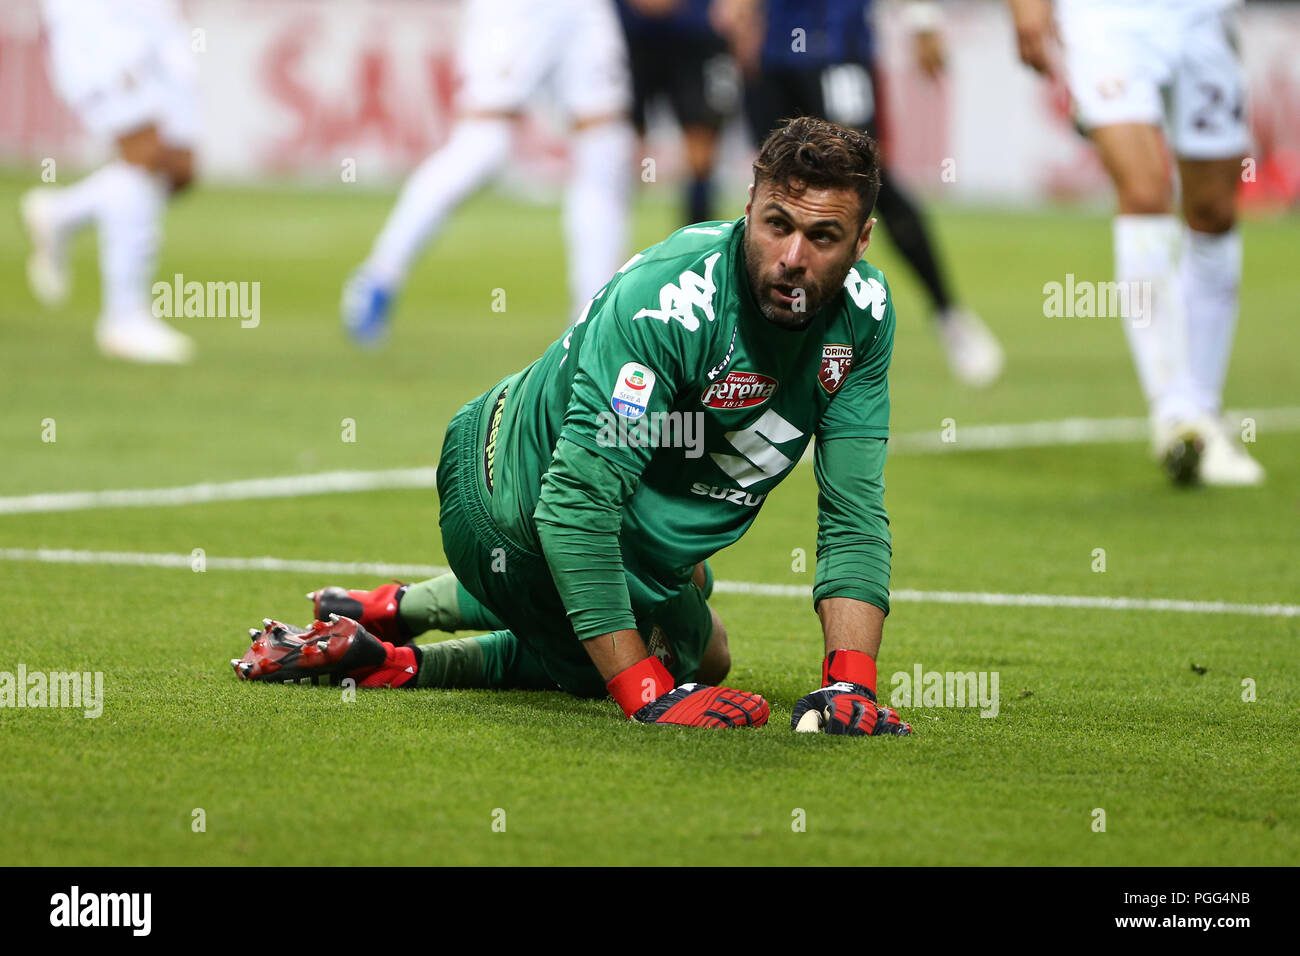 Milano, Italy. 26th August, 2018.  Salvatore Sirigu of Torino FC in action   during the Serie A football match between FC Internazionale and Torino Fc. Credit: Marco Canoniero/Alamy Live News Stock Photo